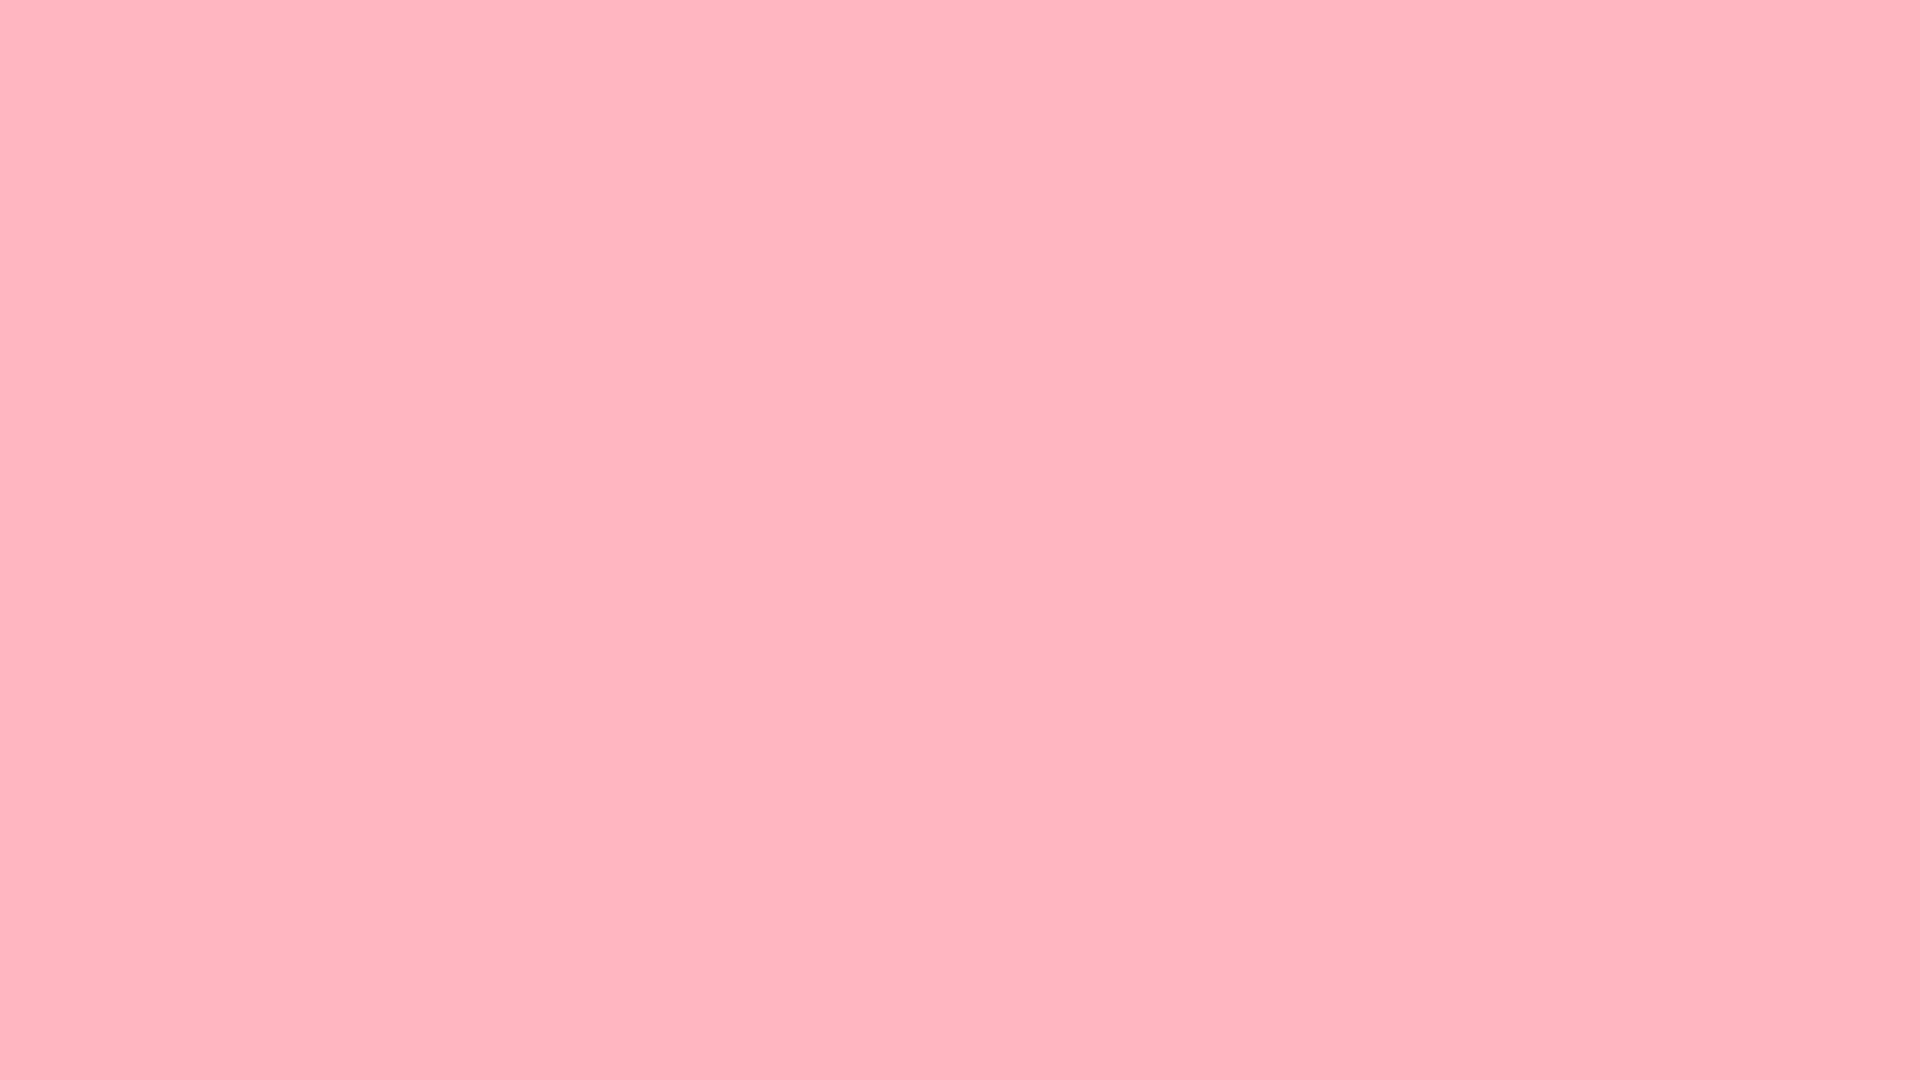 Solid Light Pink Backgrounds 1920x1080 light pink solid